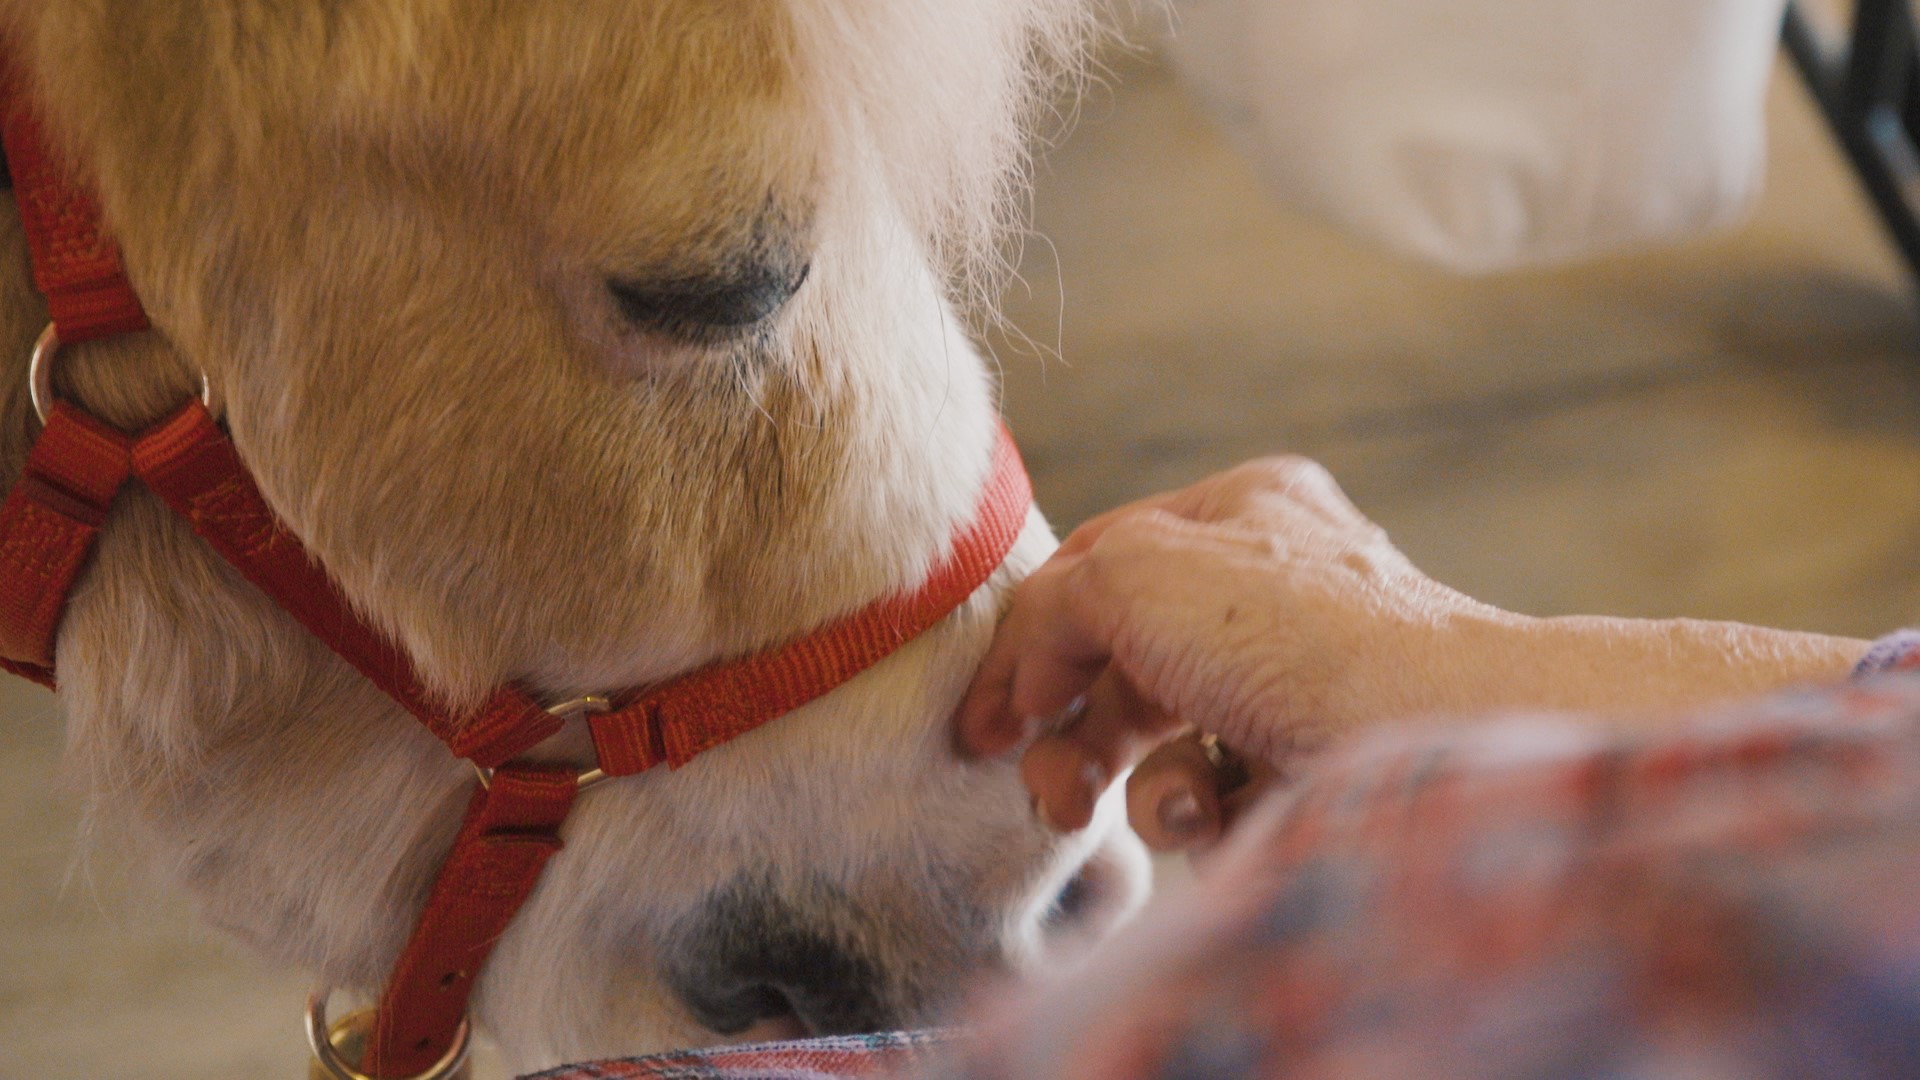 Alicia Blackwood visits retirement facilities with her miniature therapy horse in tow.